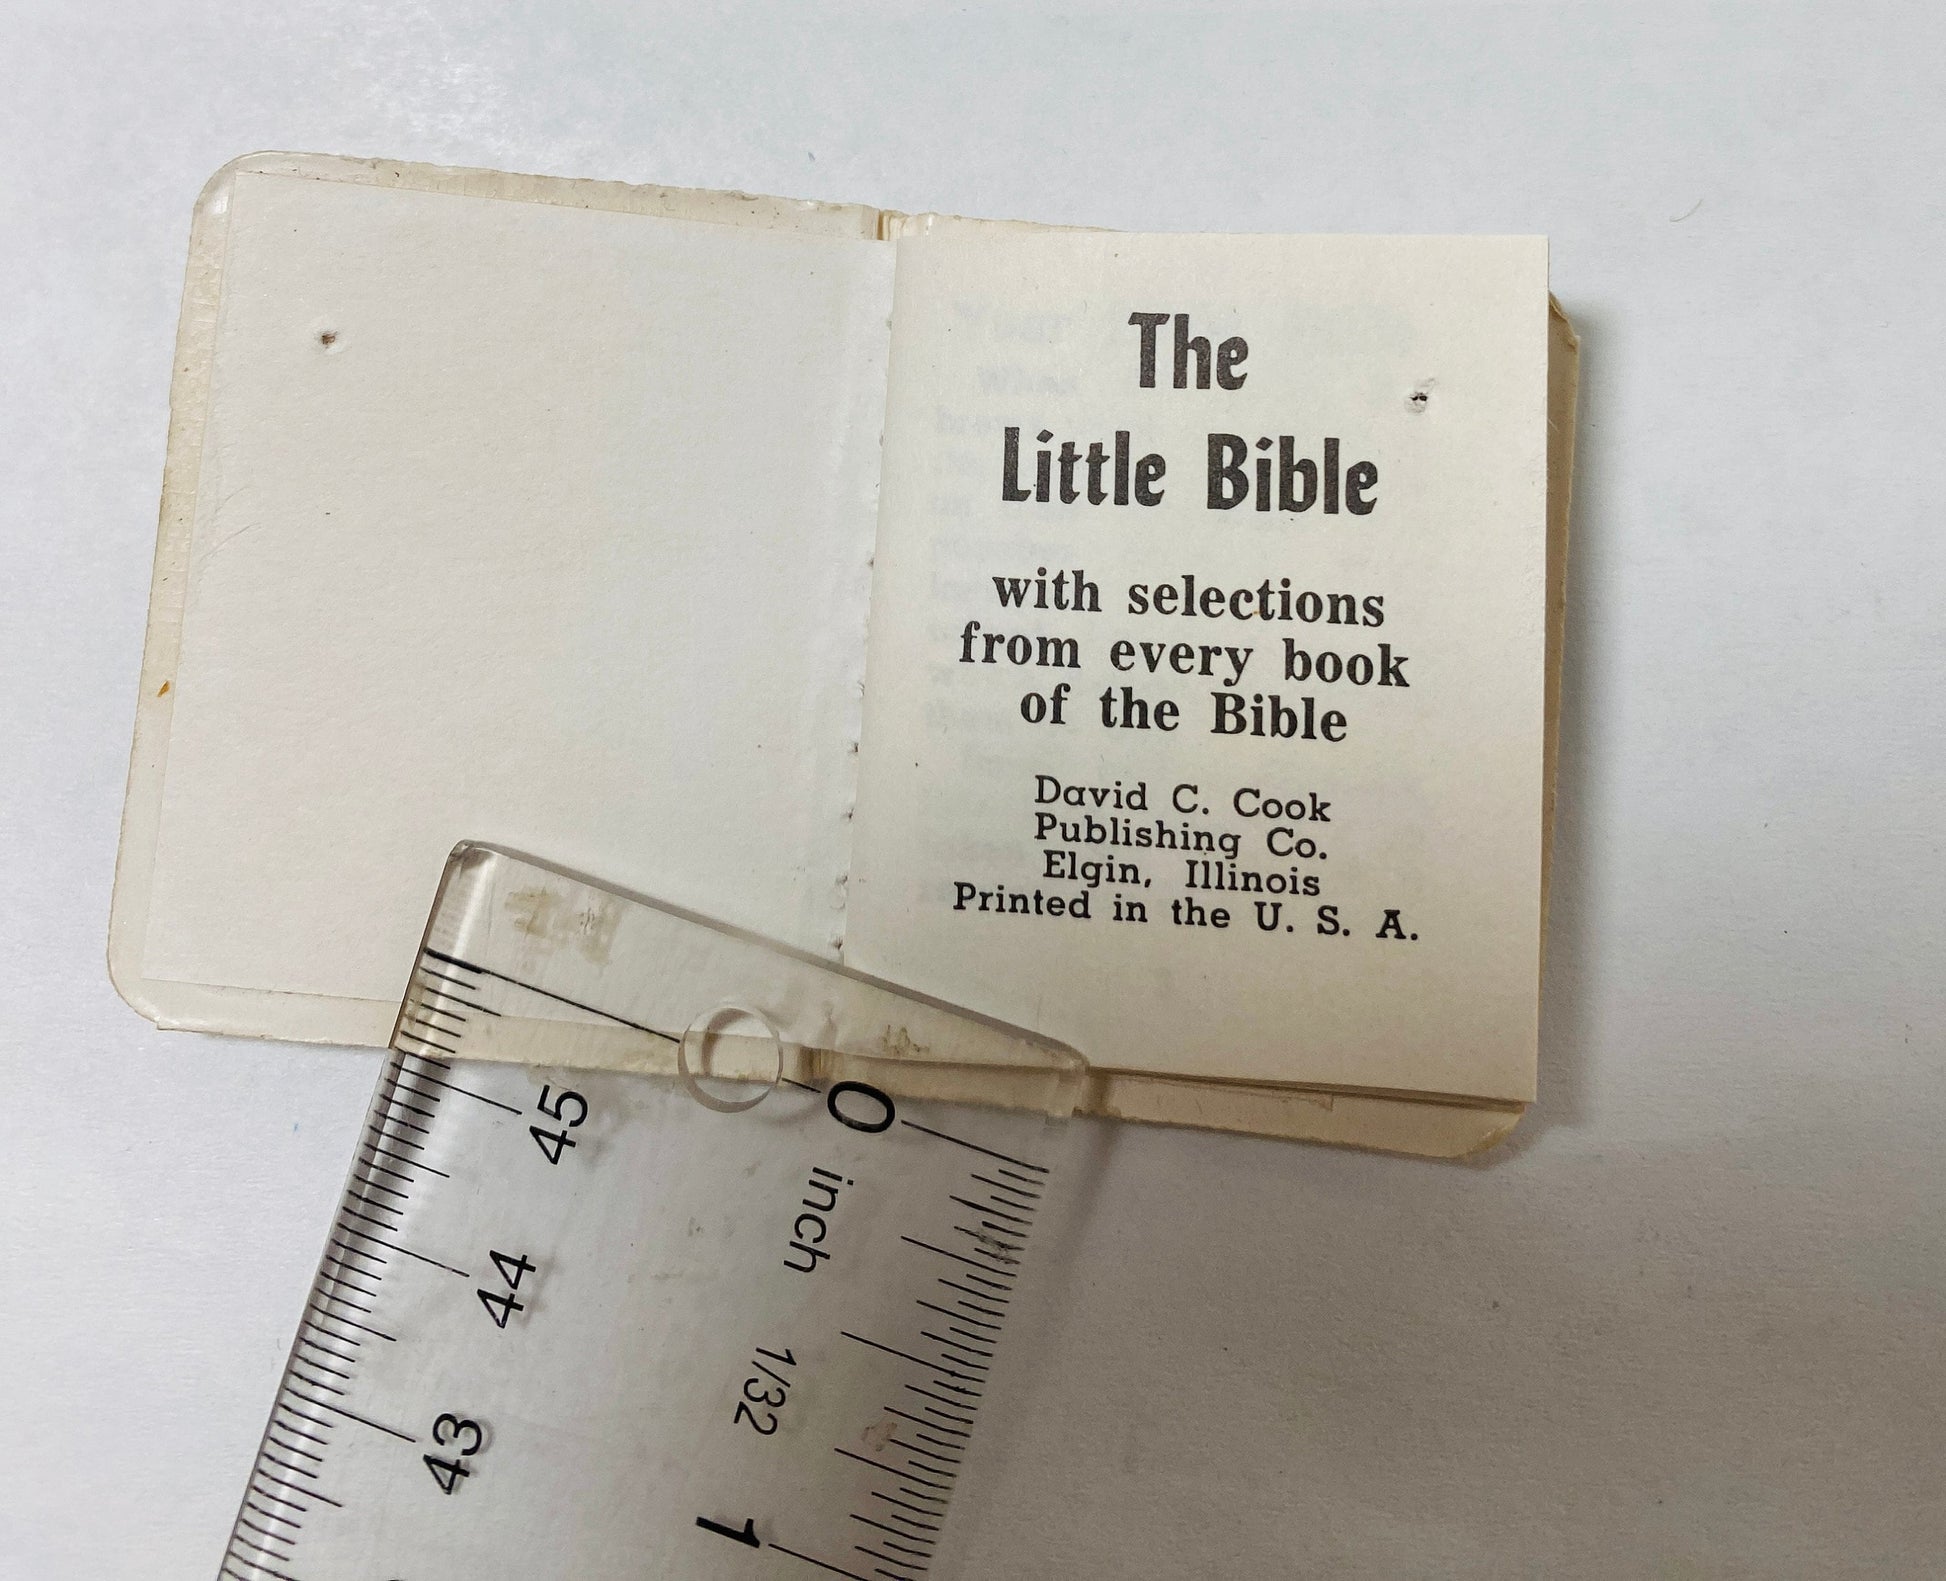 1970 vintage miniature bible the Little Bible with selections from every book of the Bible published in US by David Cook 2" x 1.75"